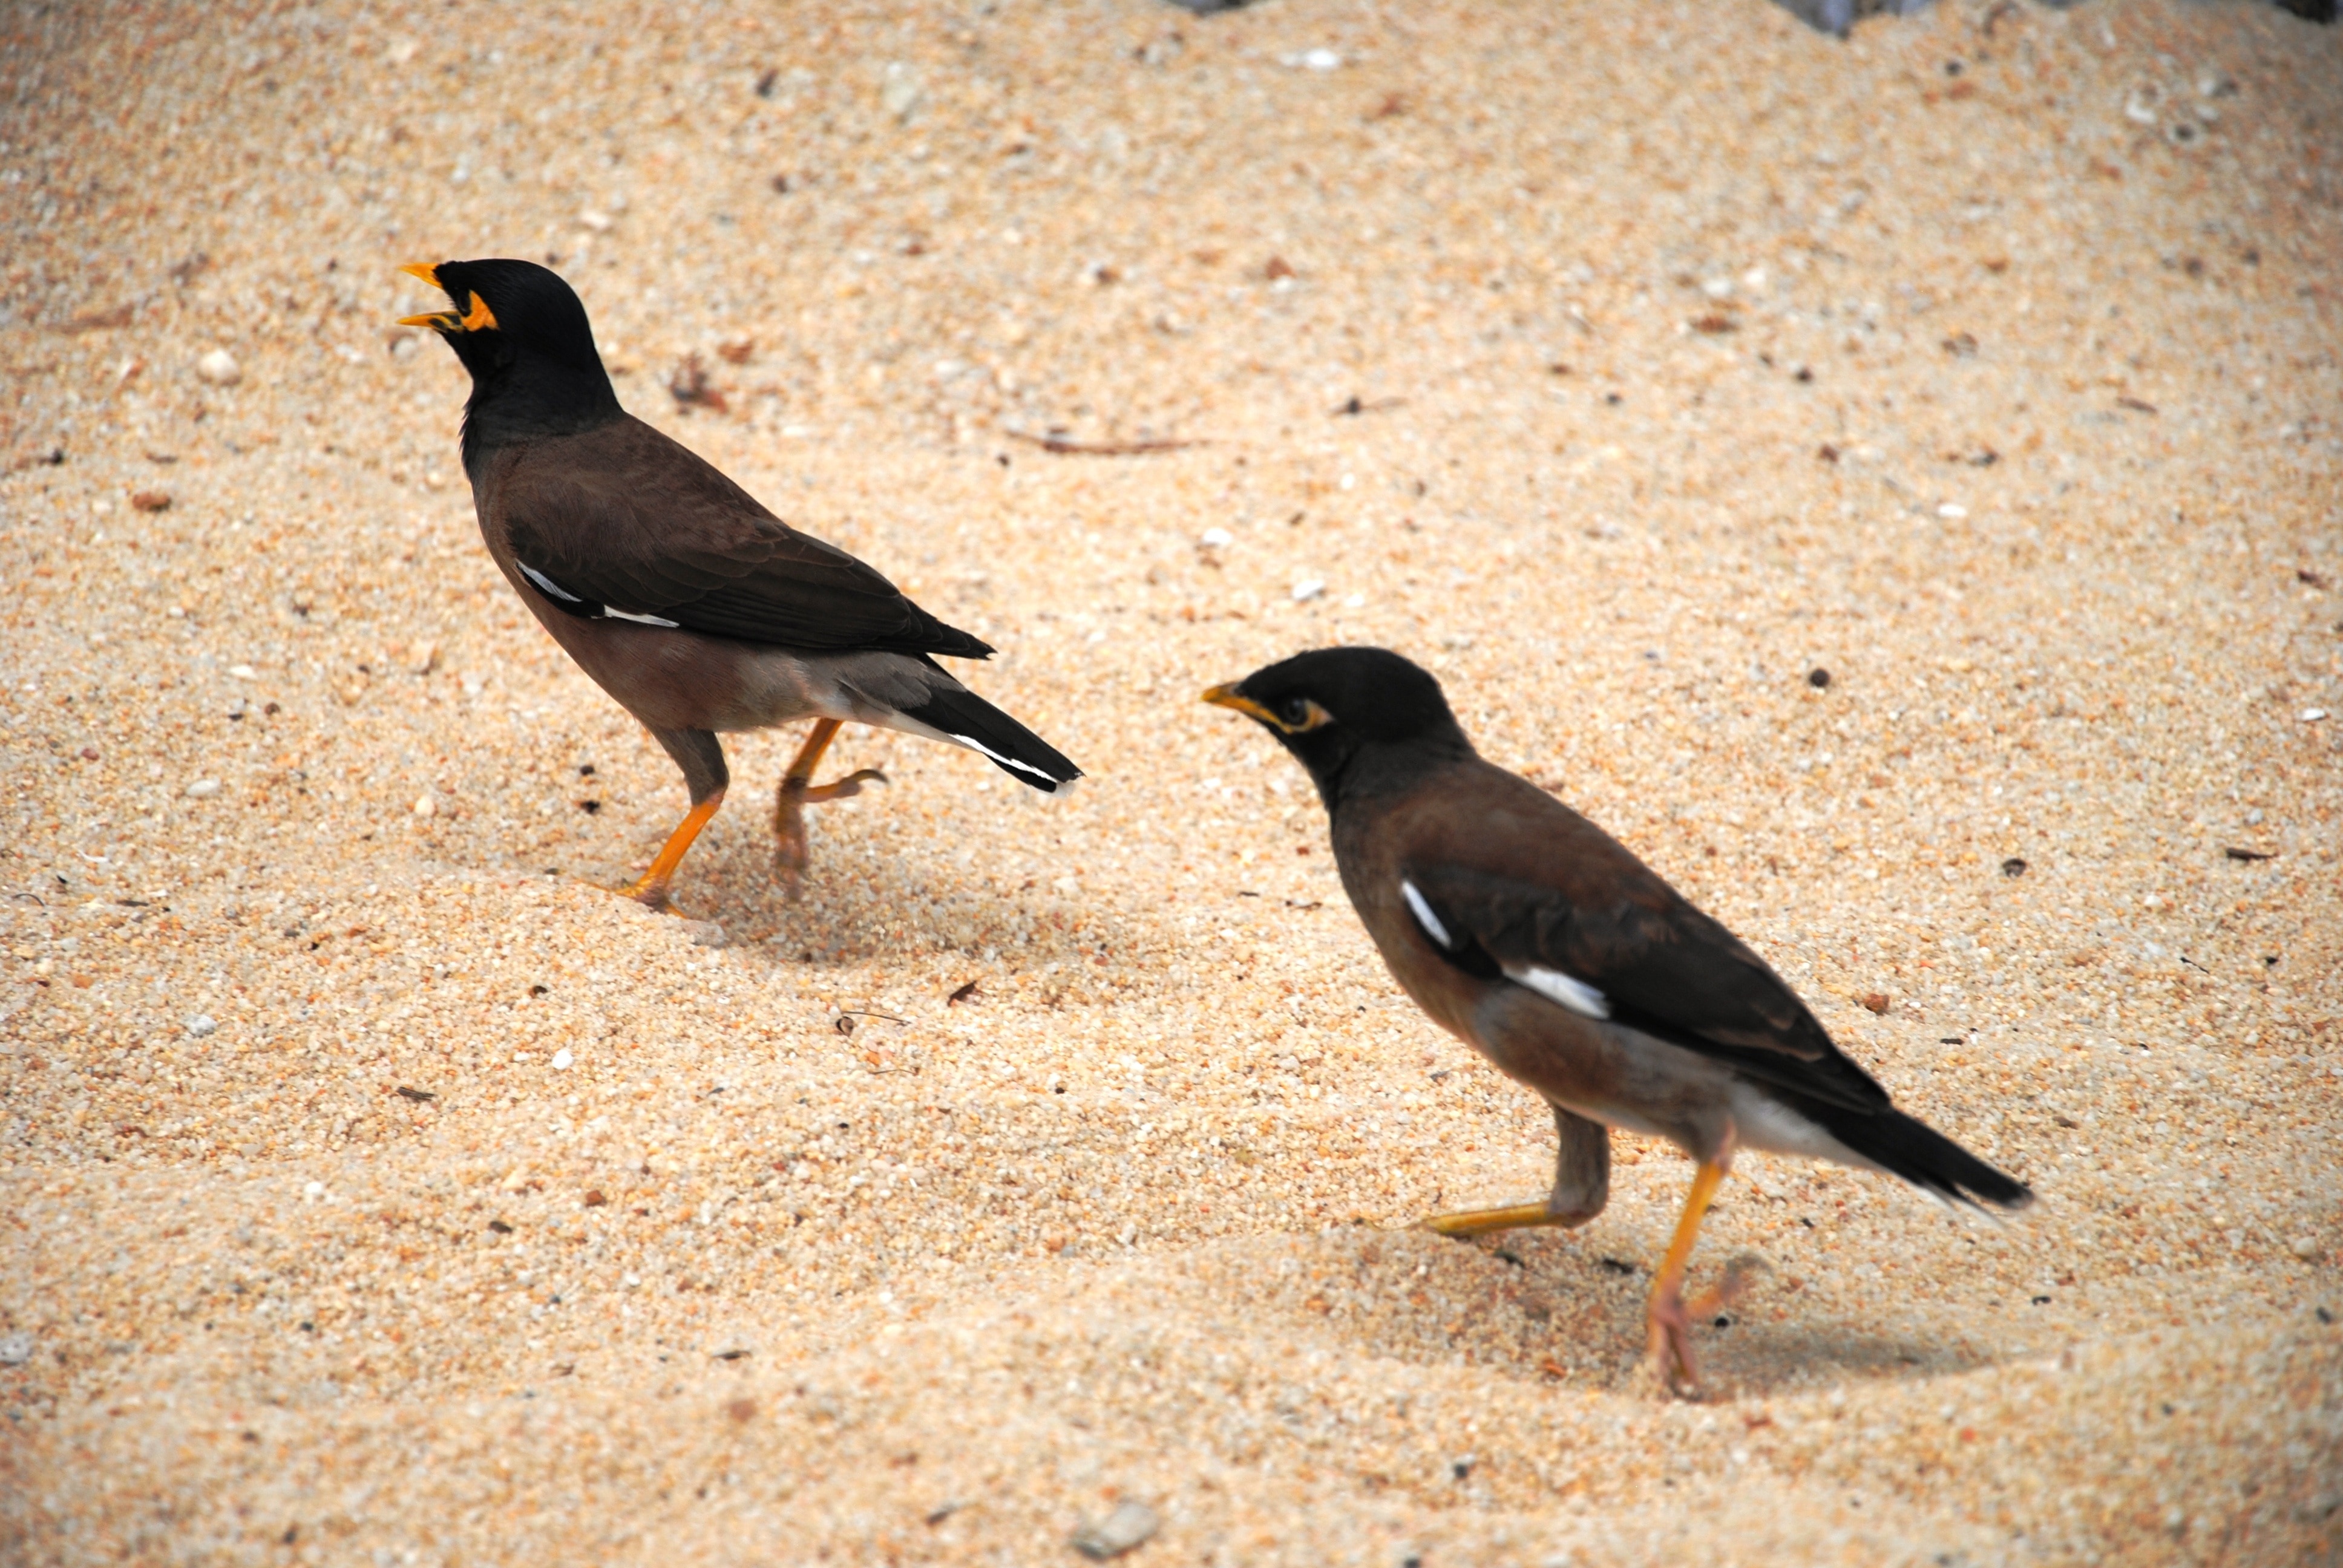 two black-and-gray feathered birds